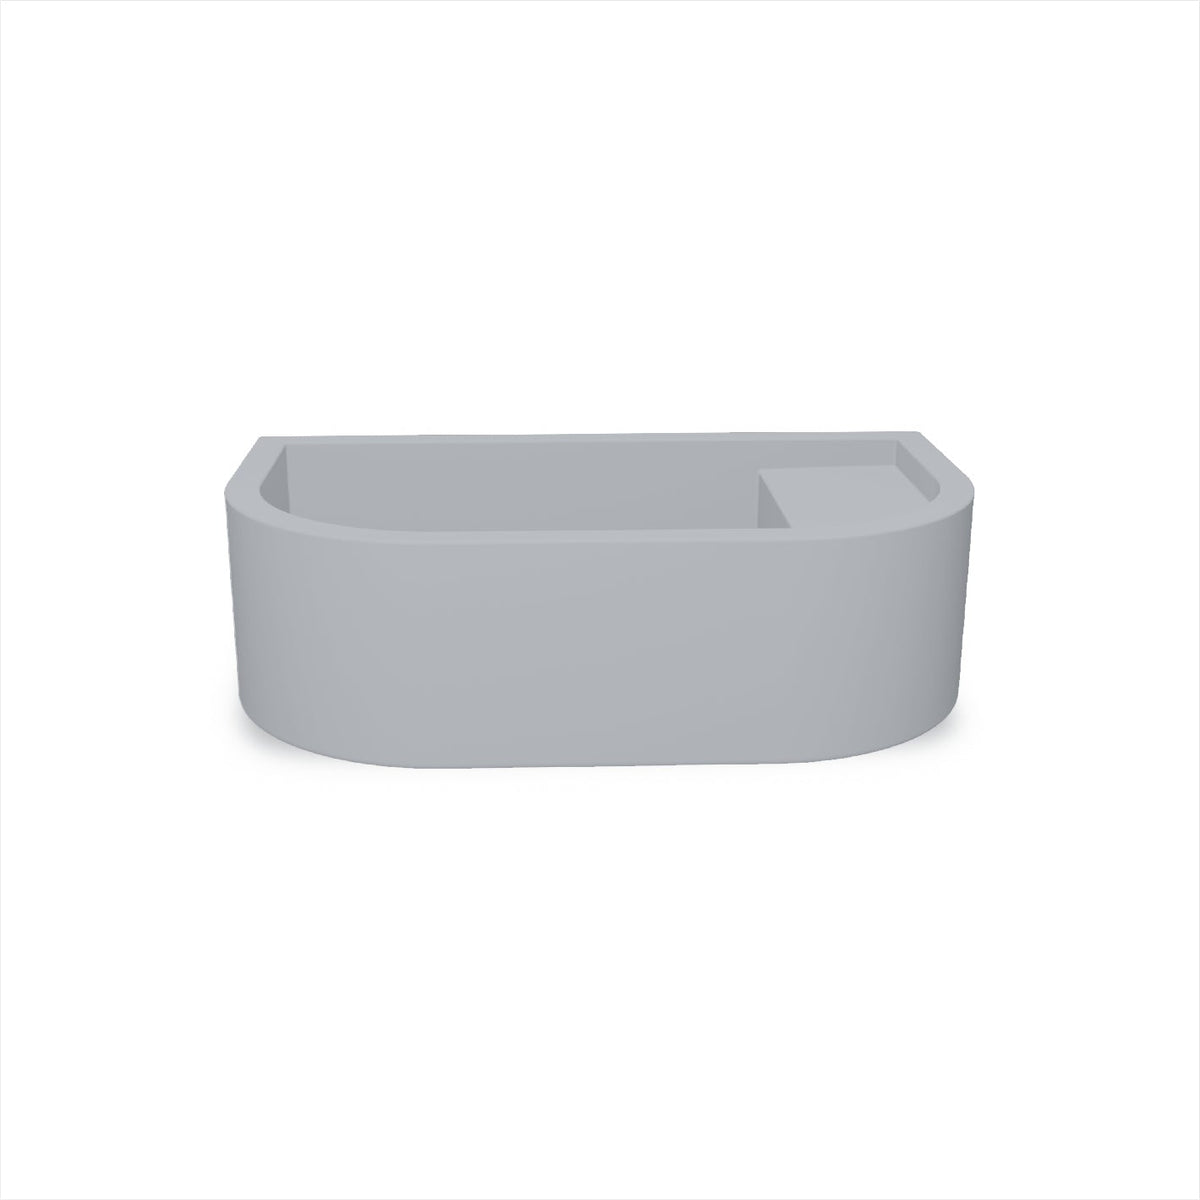 Loop 01 Basin - Overflow - Surface Mount (Powder Blue,No Tap Hole,White)